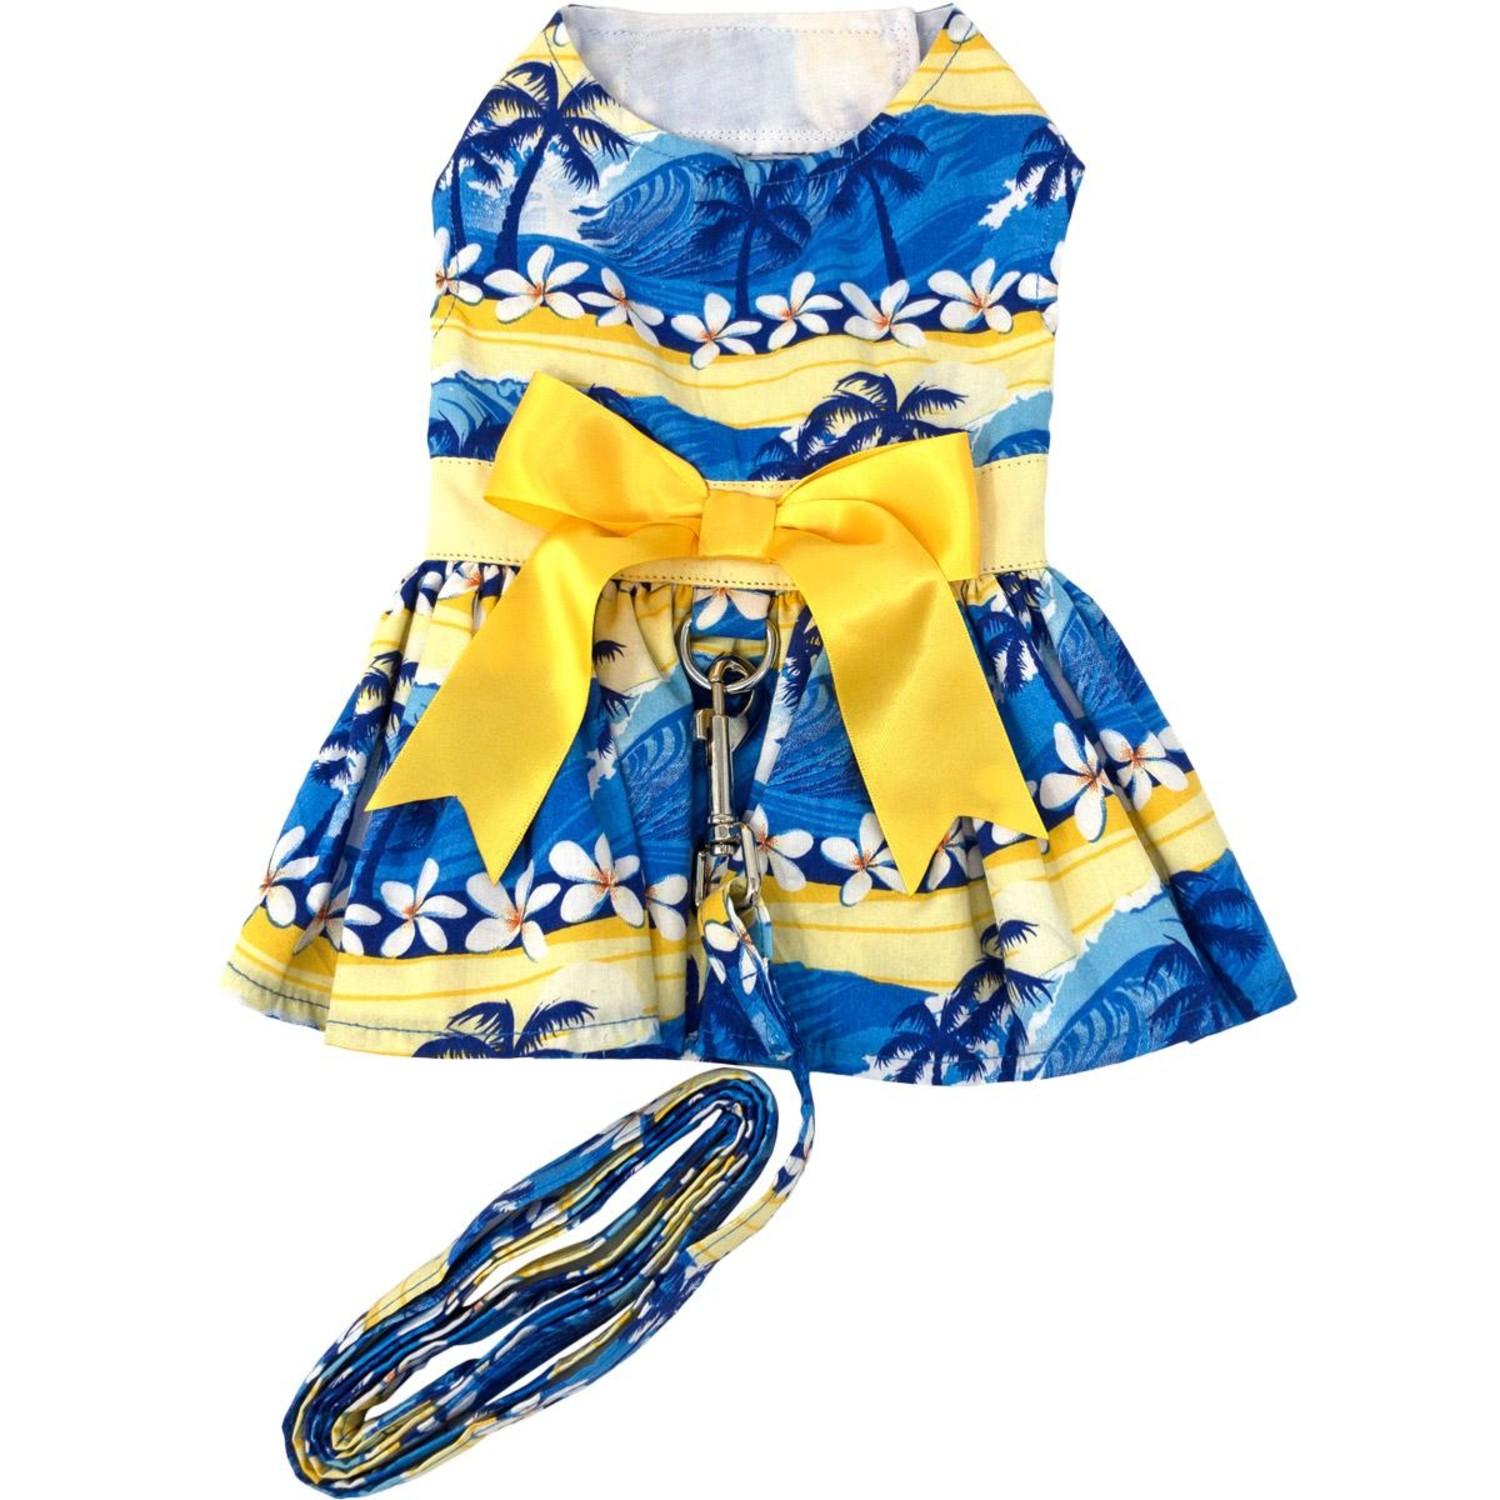 Catching Waves Dog Harness Dress with Leash by Doggie Design